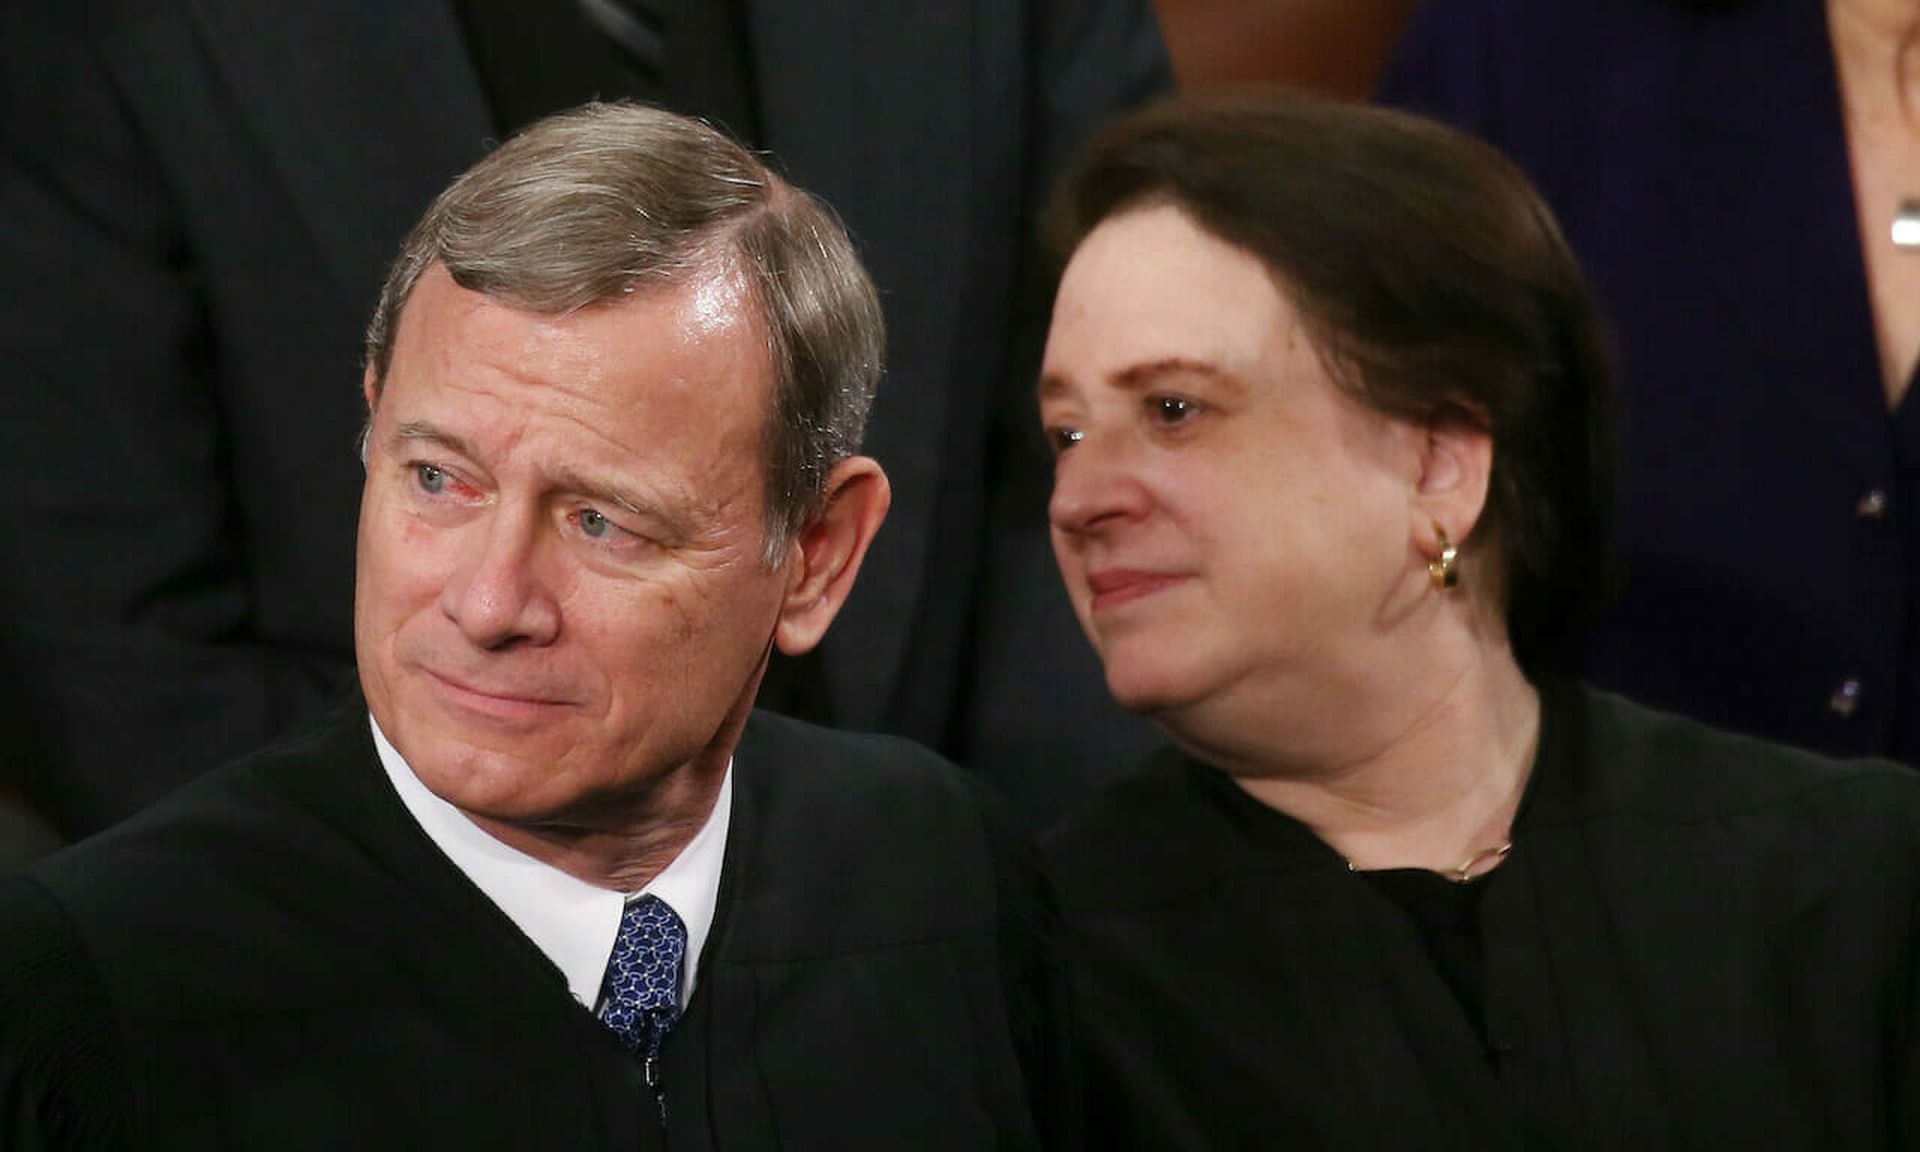 U.S. Supreme Court Chief Justice John Roberts and Supreme Court Justice Elena Kagan attend the State of the Union address in the chamber of the U.S. House of Representatives on February 04, 2020 in Washington, DC.  The Supreme Court on Monday heard oral arguments in Van Buren v. United States, a computer crimes case whose verdict could significantl...